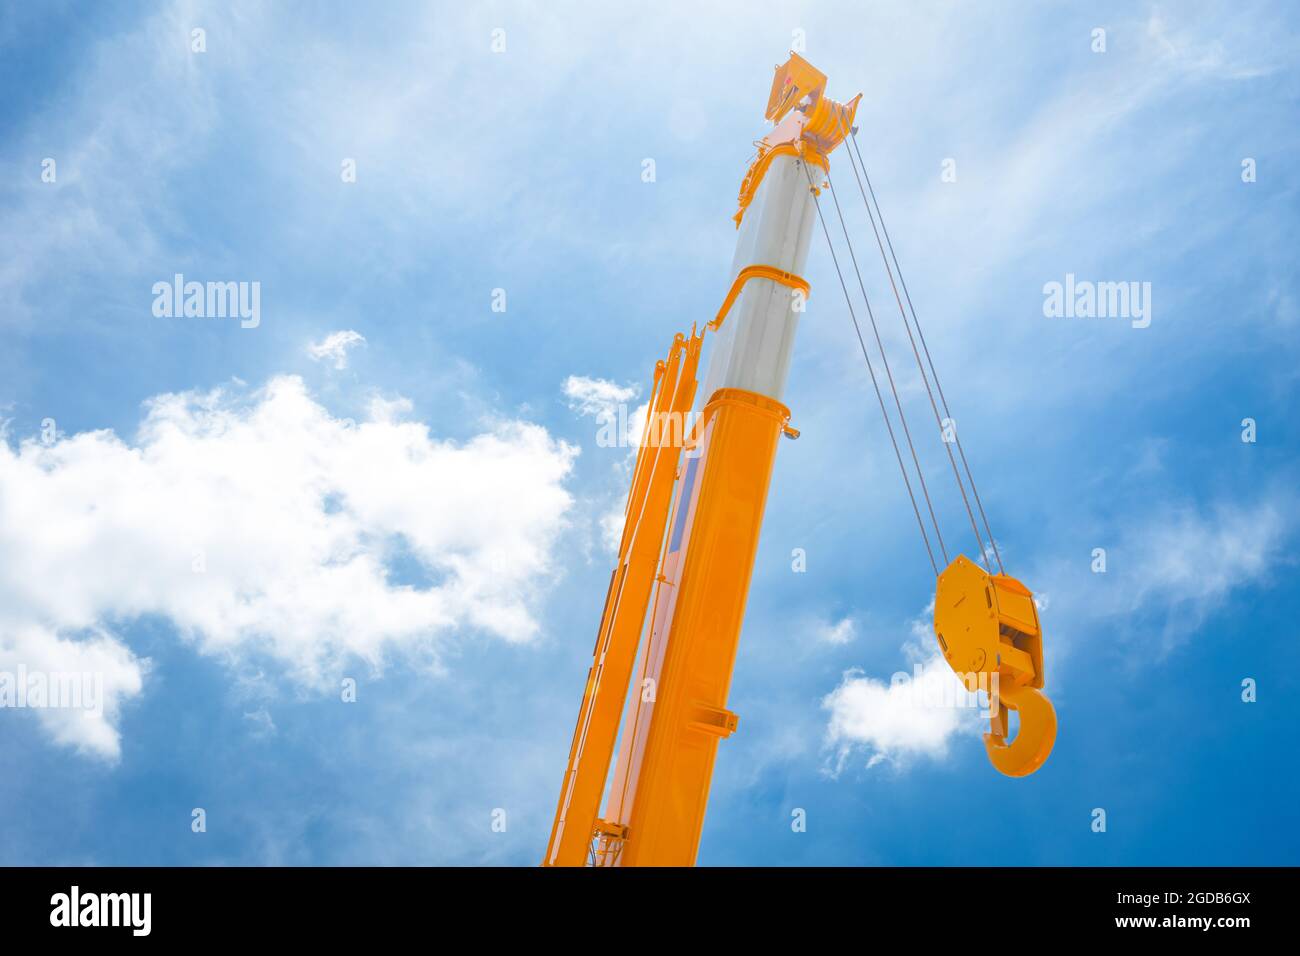 Hoist crane yellow hook head construction truck clean new with blue sky cloud background. Stock Photo